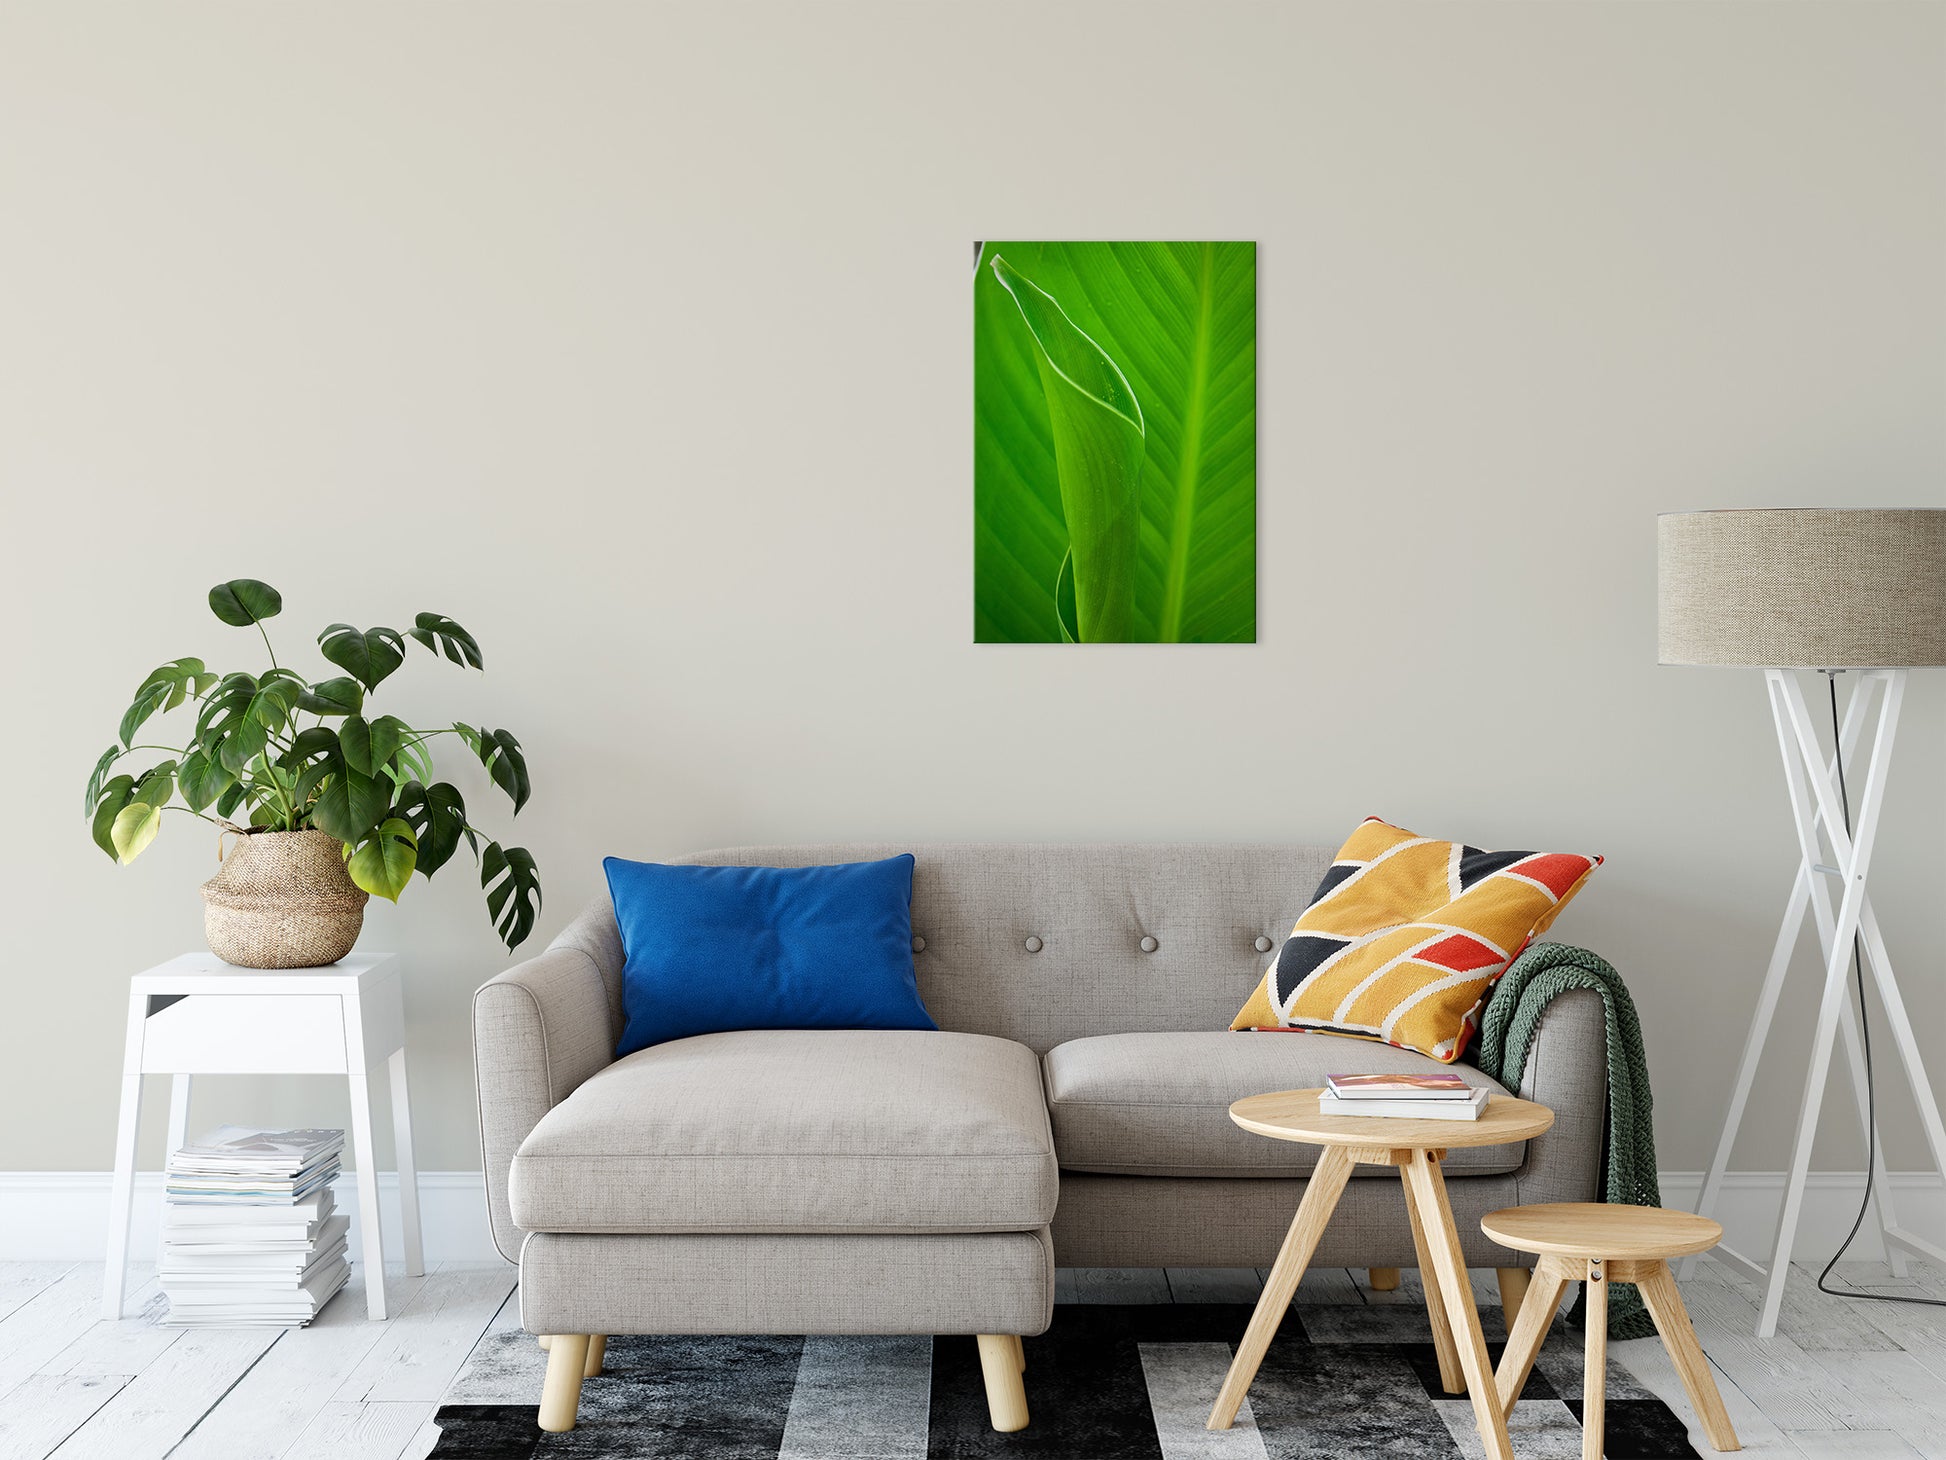 Leaves Canna Lily Plant Nature / Botanical Photo Fine Art Canvas Wall Art Prints 20" x 30" - PIPAFINEART